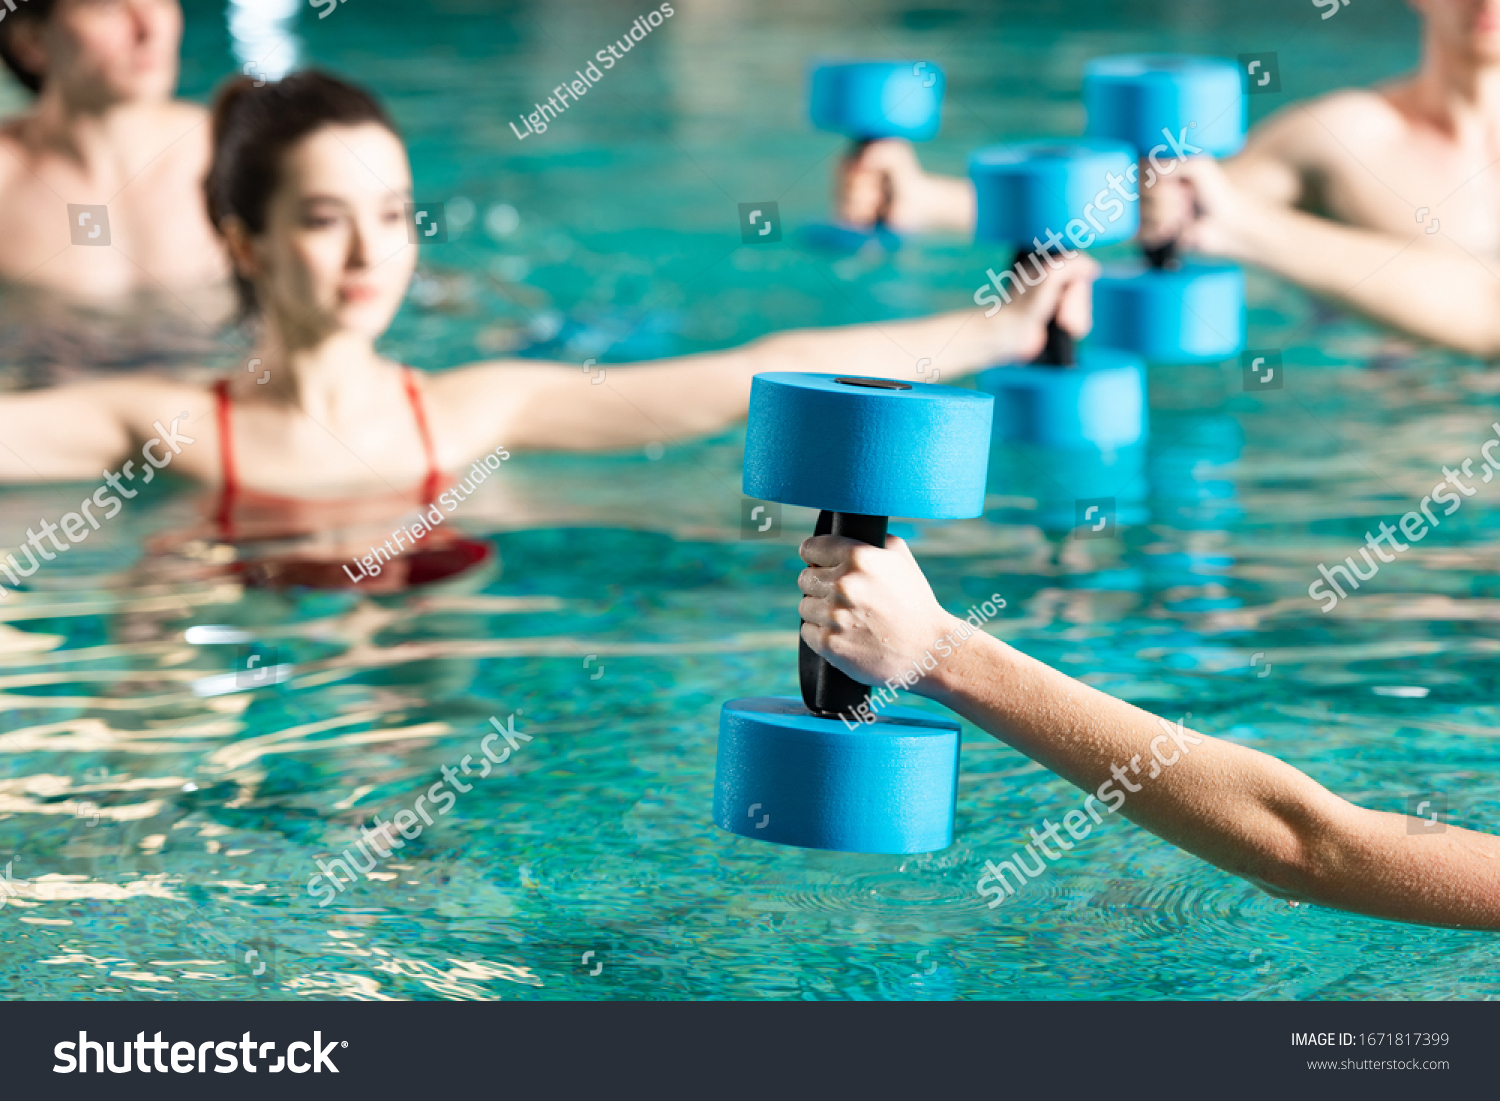 Selective focus of trainer with barbell working out with people in swimming pool #1671817399